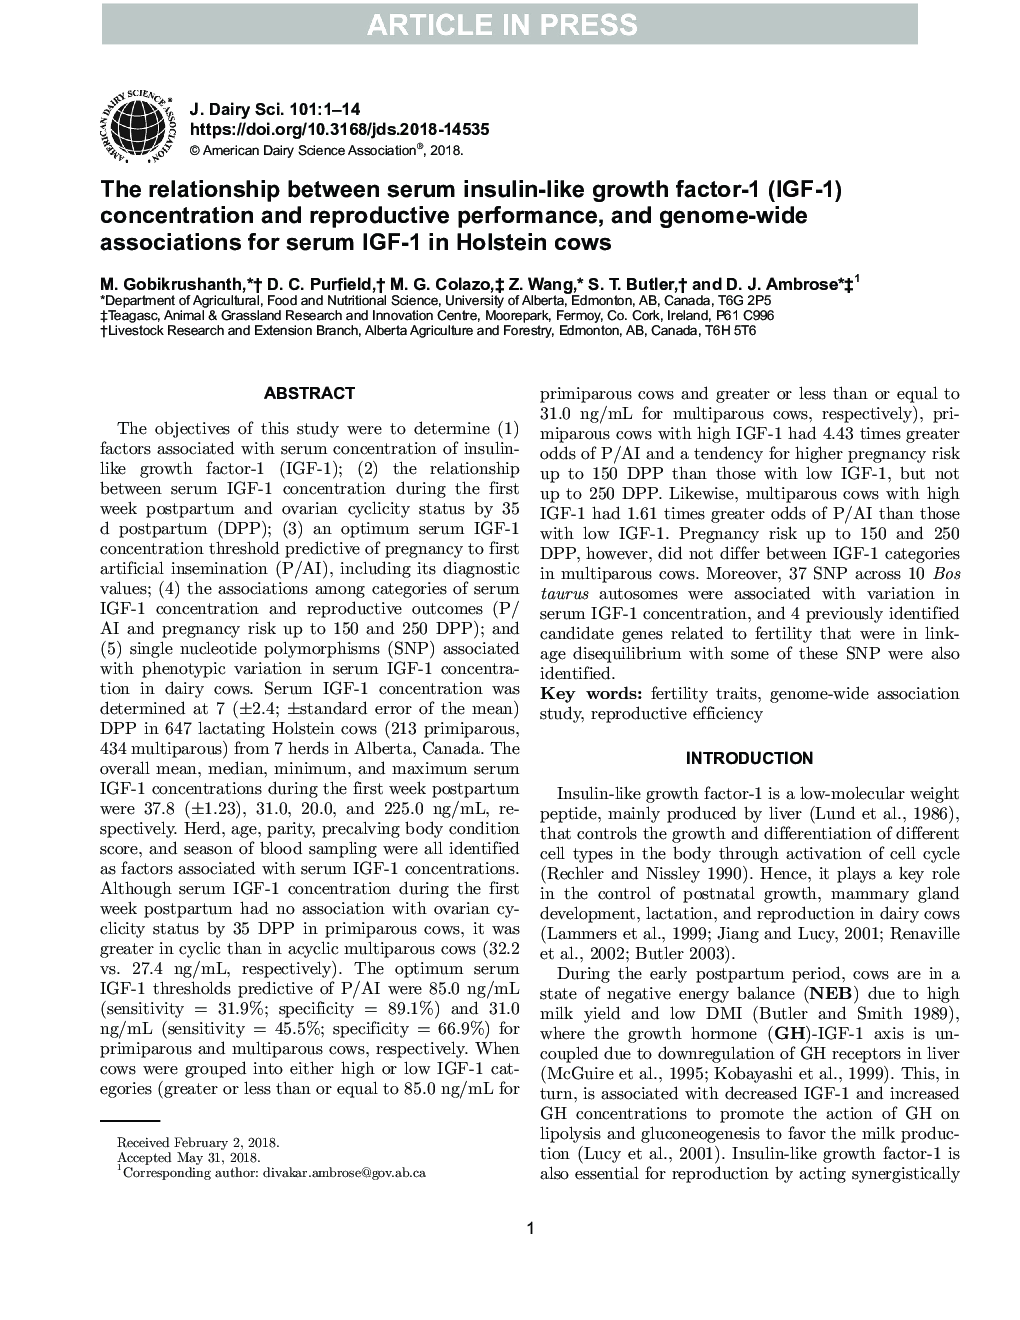 The relationship between serum insulin-like growth factor-1 (IGF-1) concentration and reproductive performance, and genome-wide associations for serum IGF-1 in Holstein cows